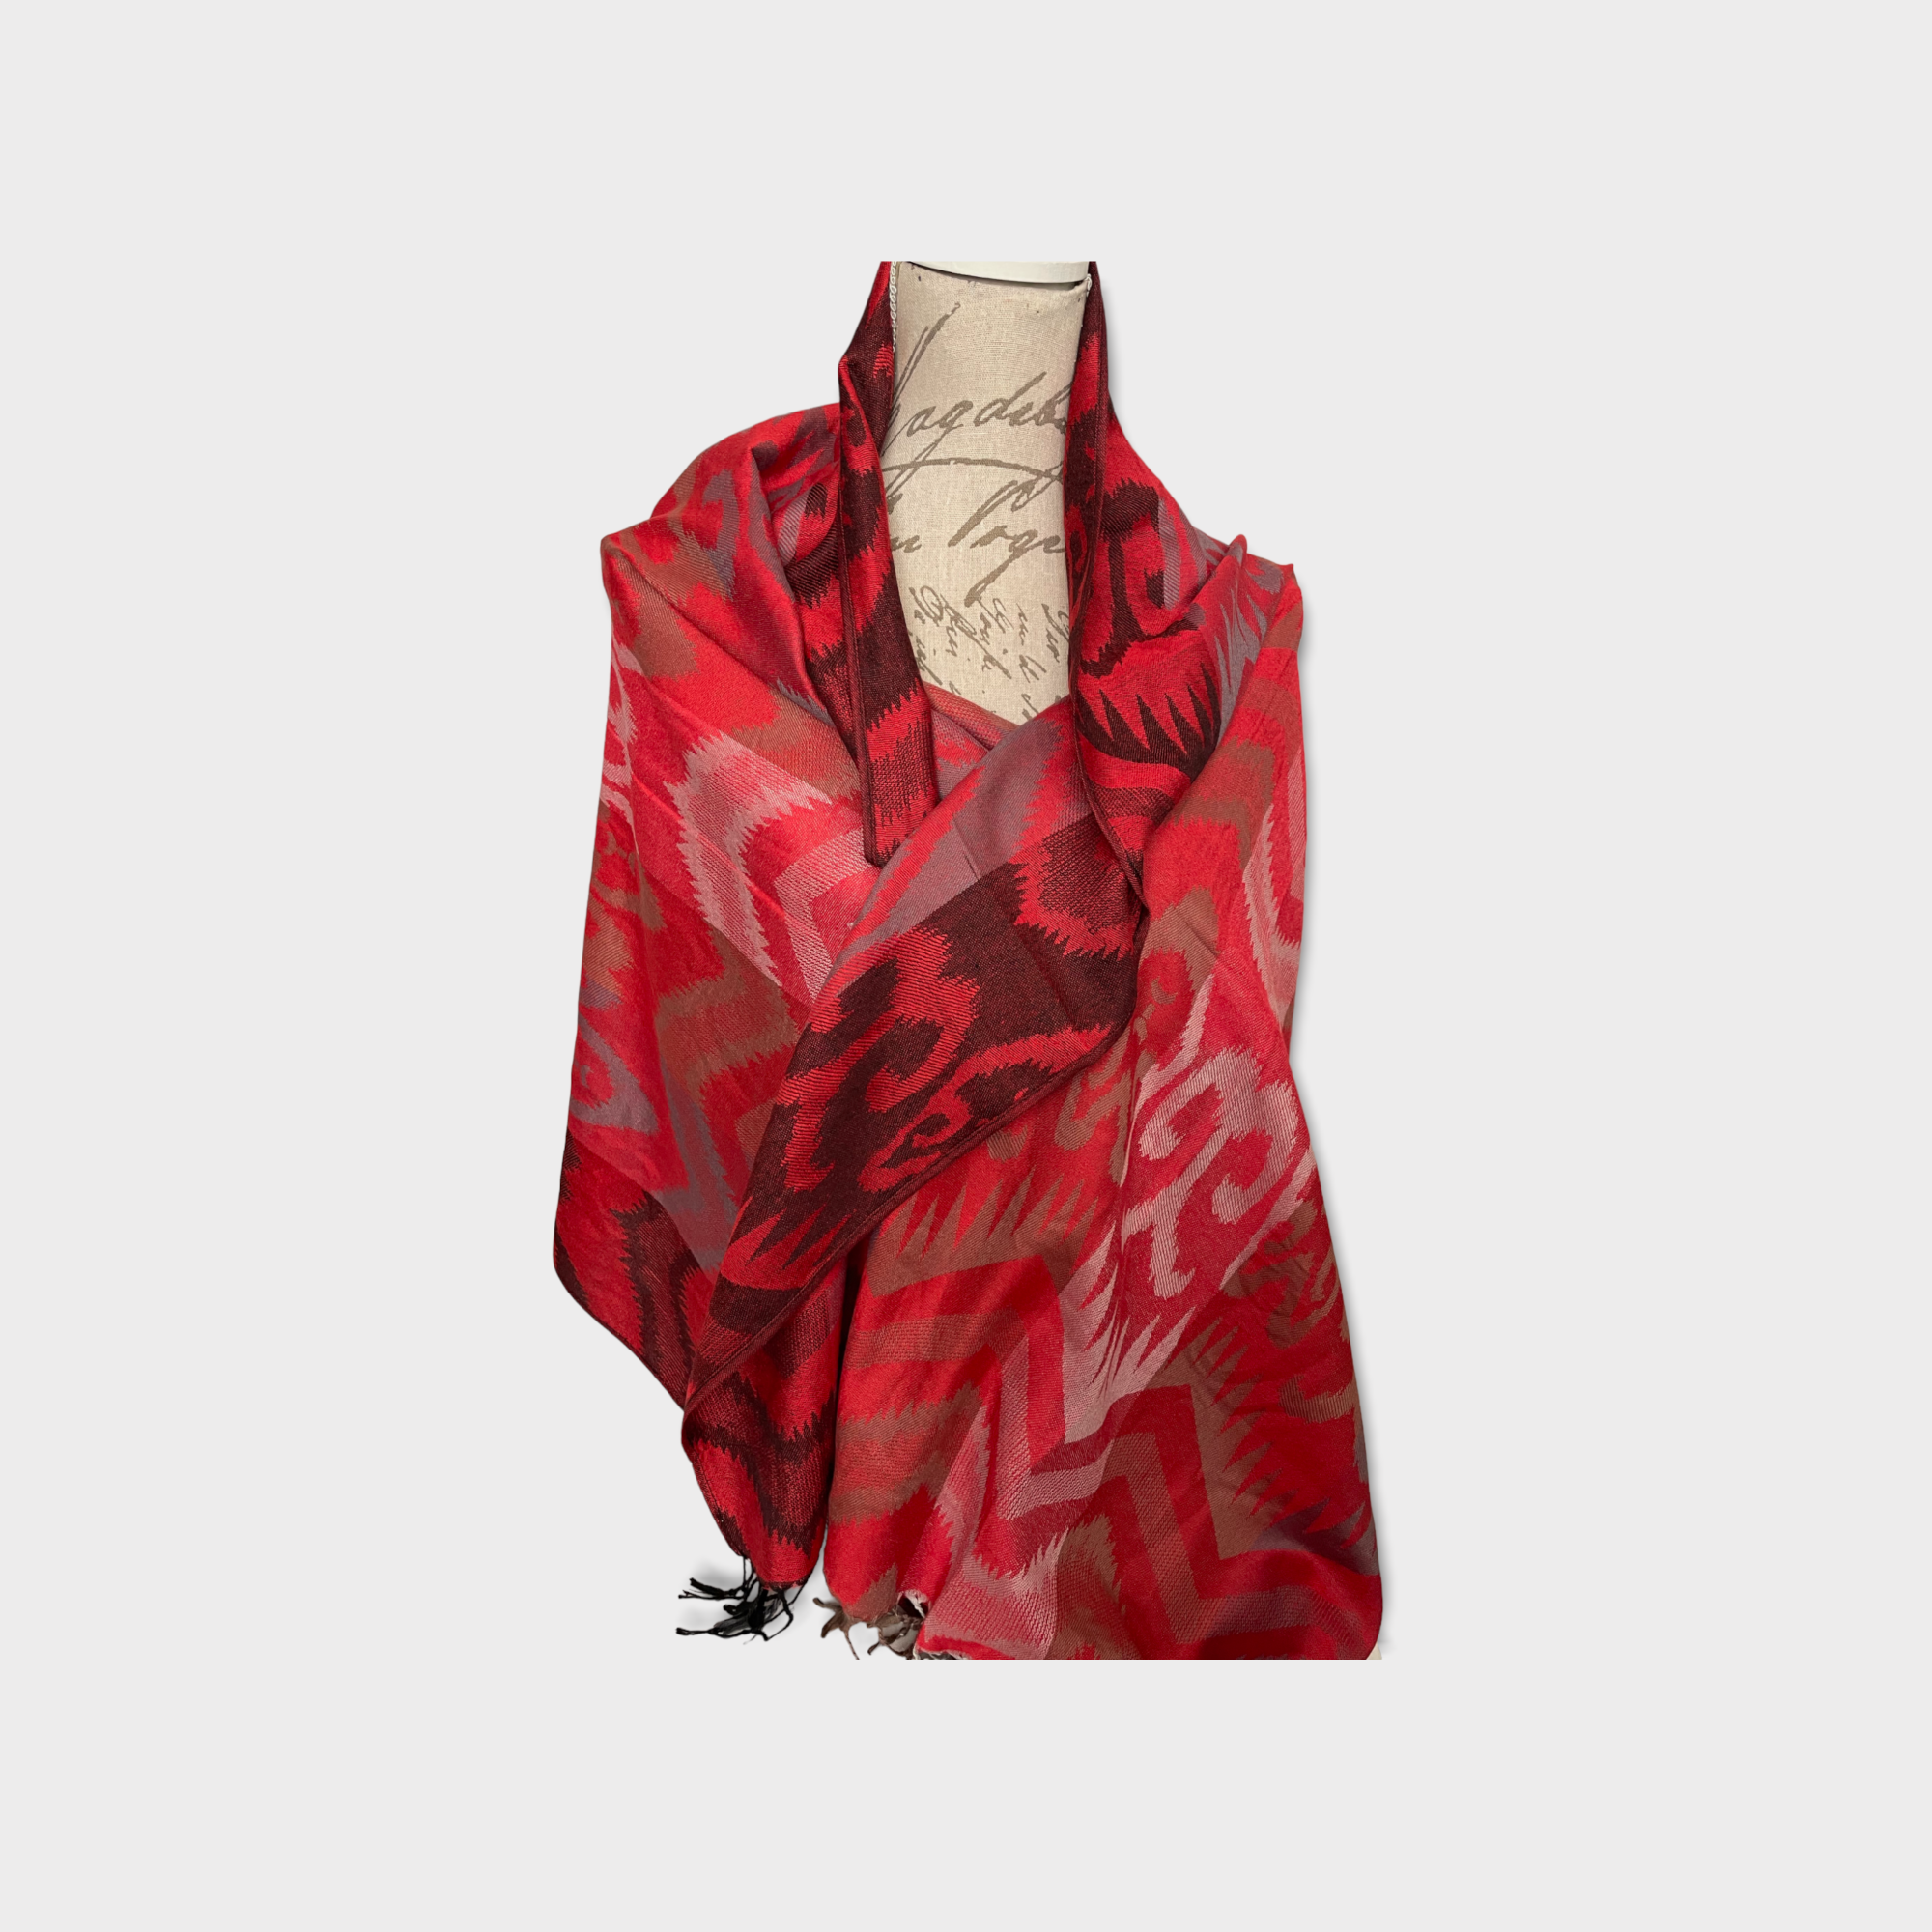 Pashima shawl from the Philippines ABSTRACT RED